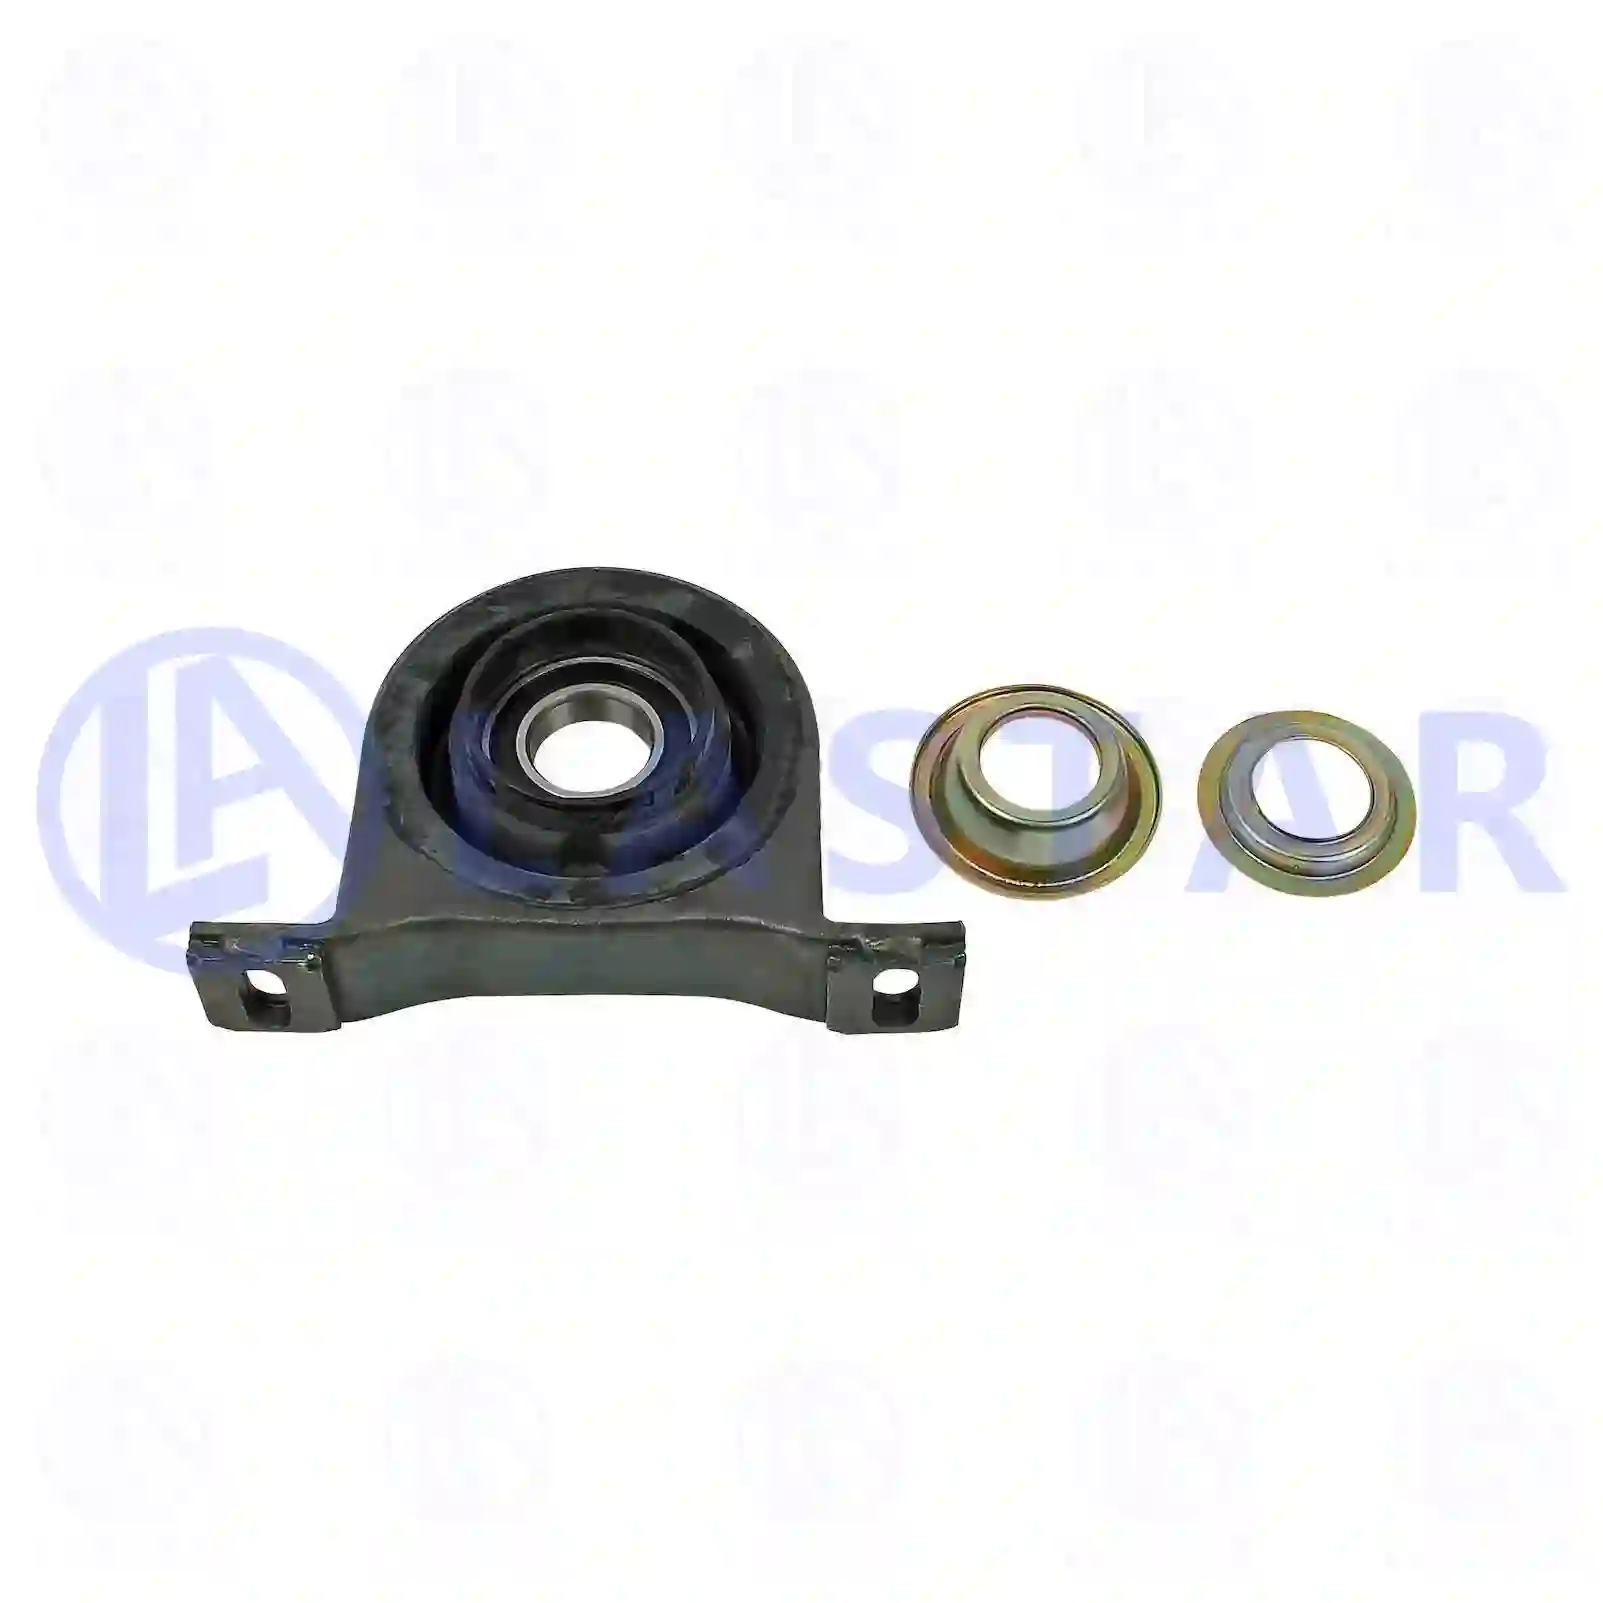 Center bearing, 77734266, 5154100382, 6394100281, 6394100681 ||  77734266 Lastar Spare Part | Truck Spare Parts, Auotomotive Spare Parts Center bearing, 77734266, 5154100382, 6394100281, 6394100681 ||  77734266 Lastar Spare Part | Truck Spare Parts, Auotomotive Spare Parts